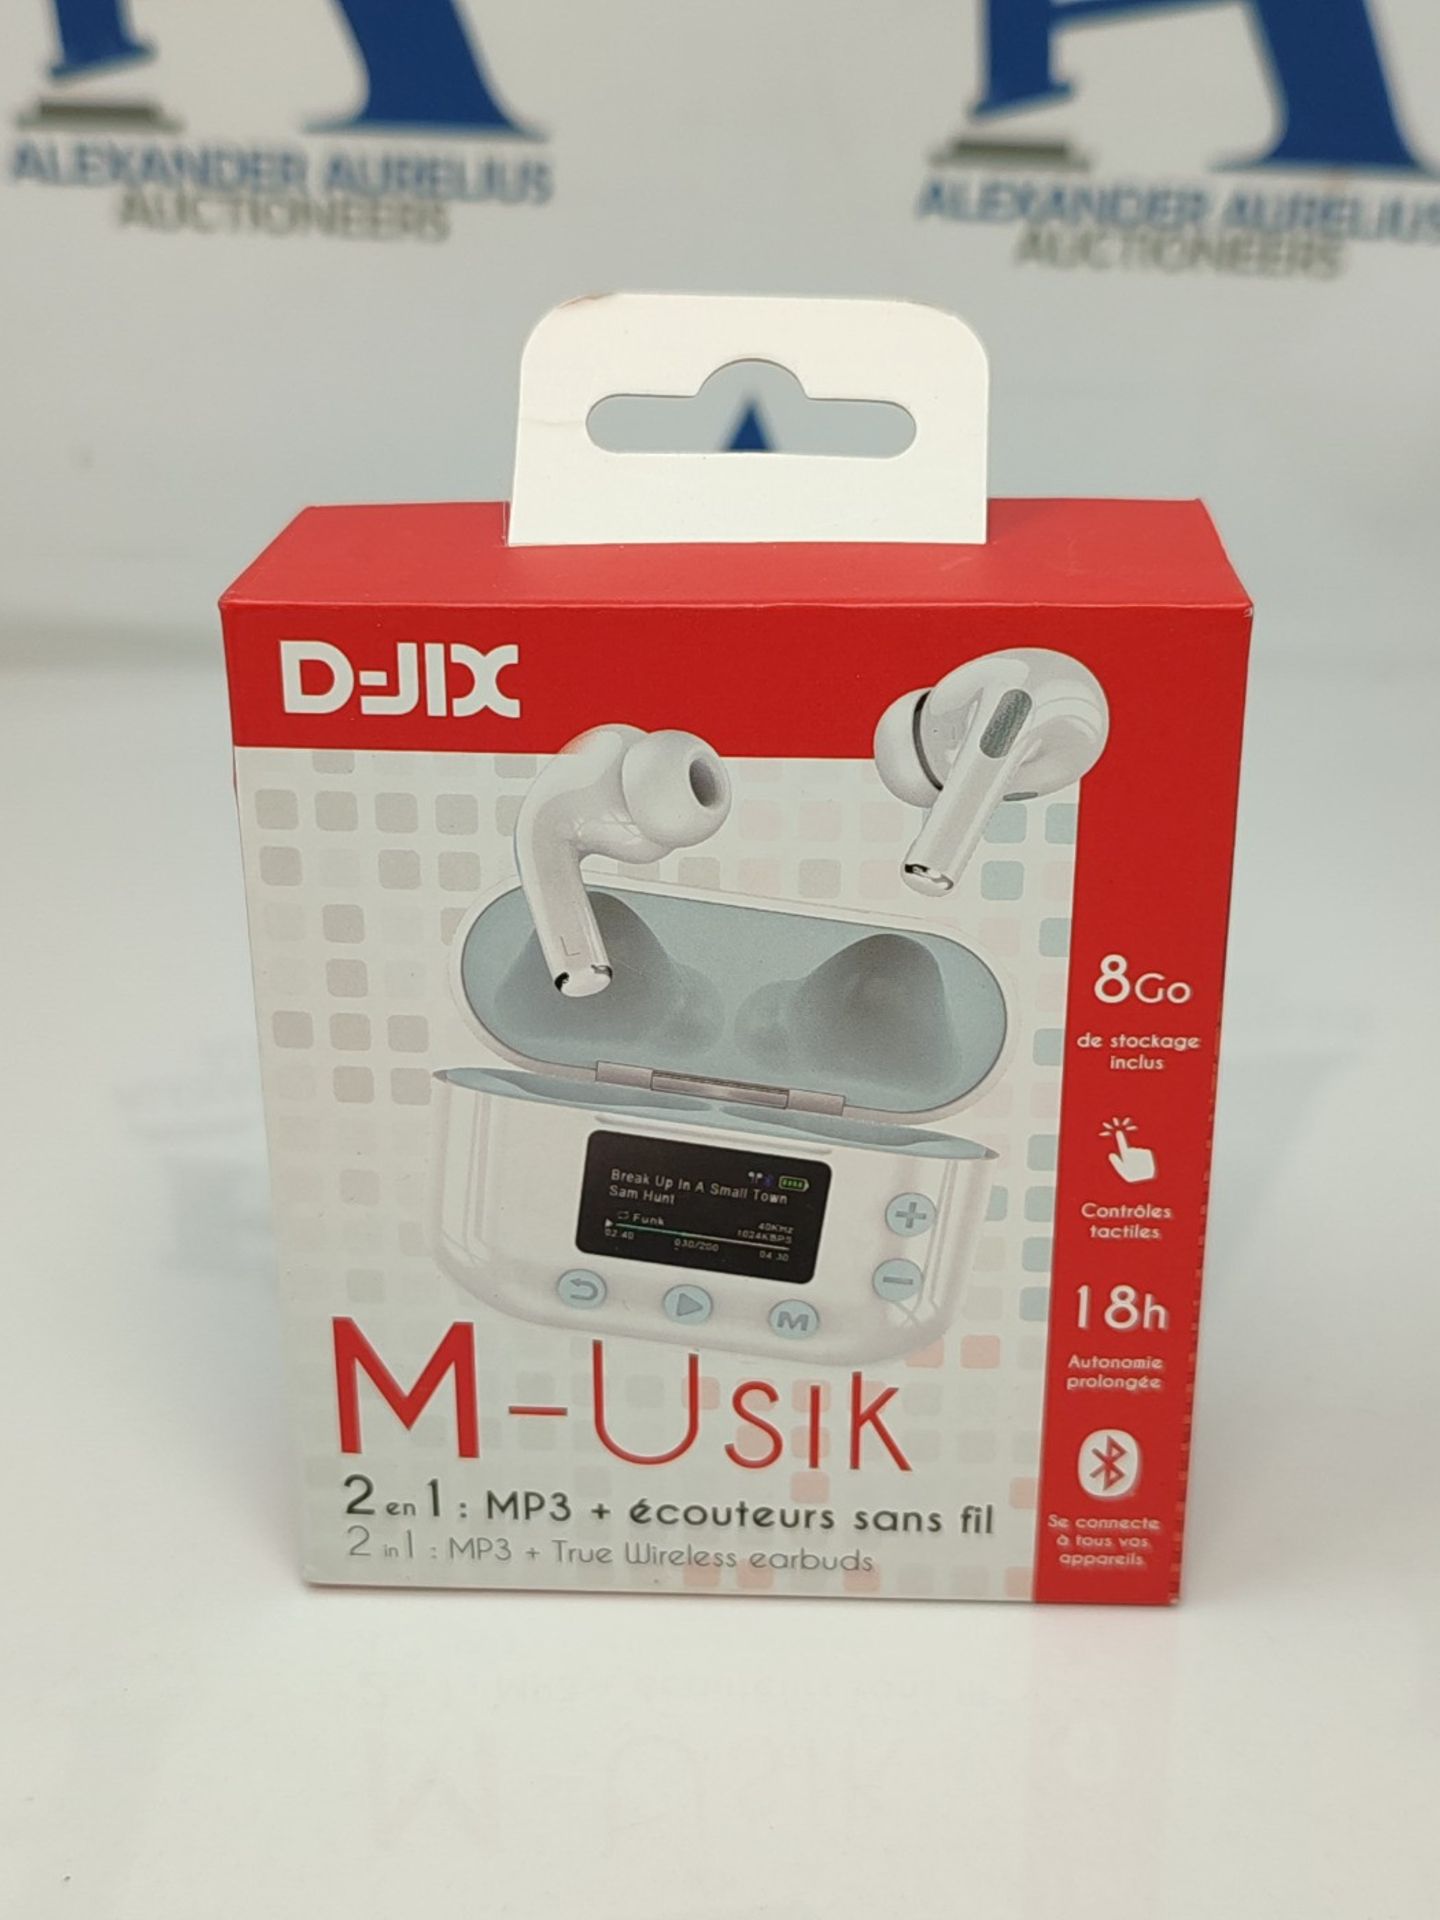 D-Jix - Wireless Bluetooth Earphones M-Usik Player - 2 in 1 Device Wireless Bluetooth - Image 2 of 3